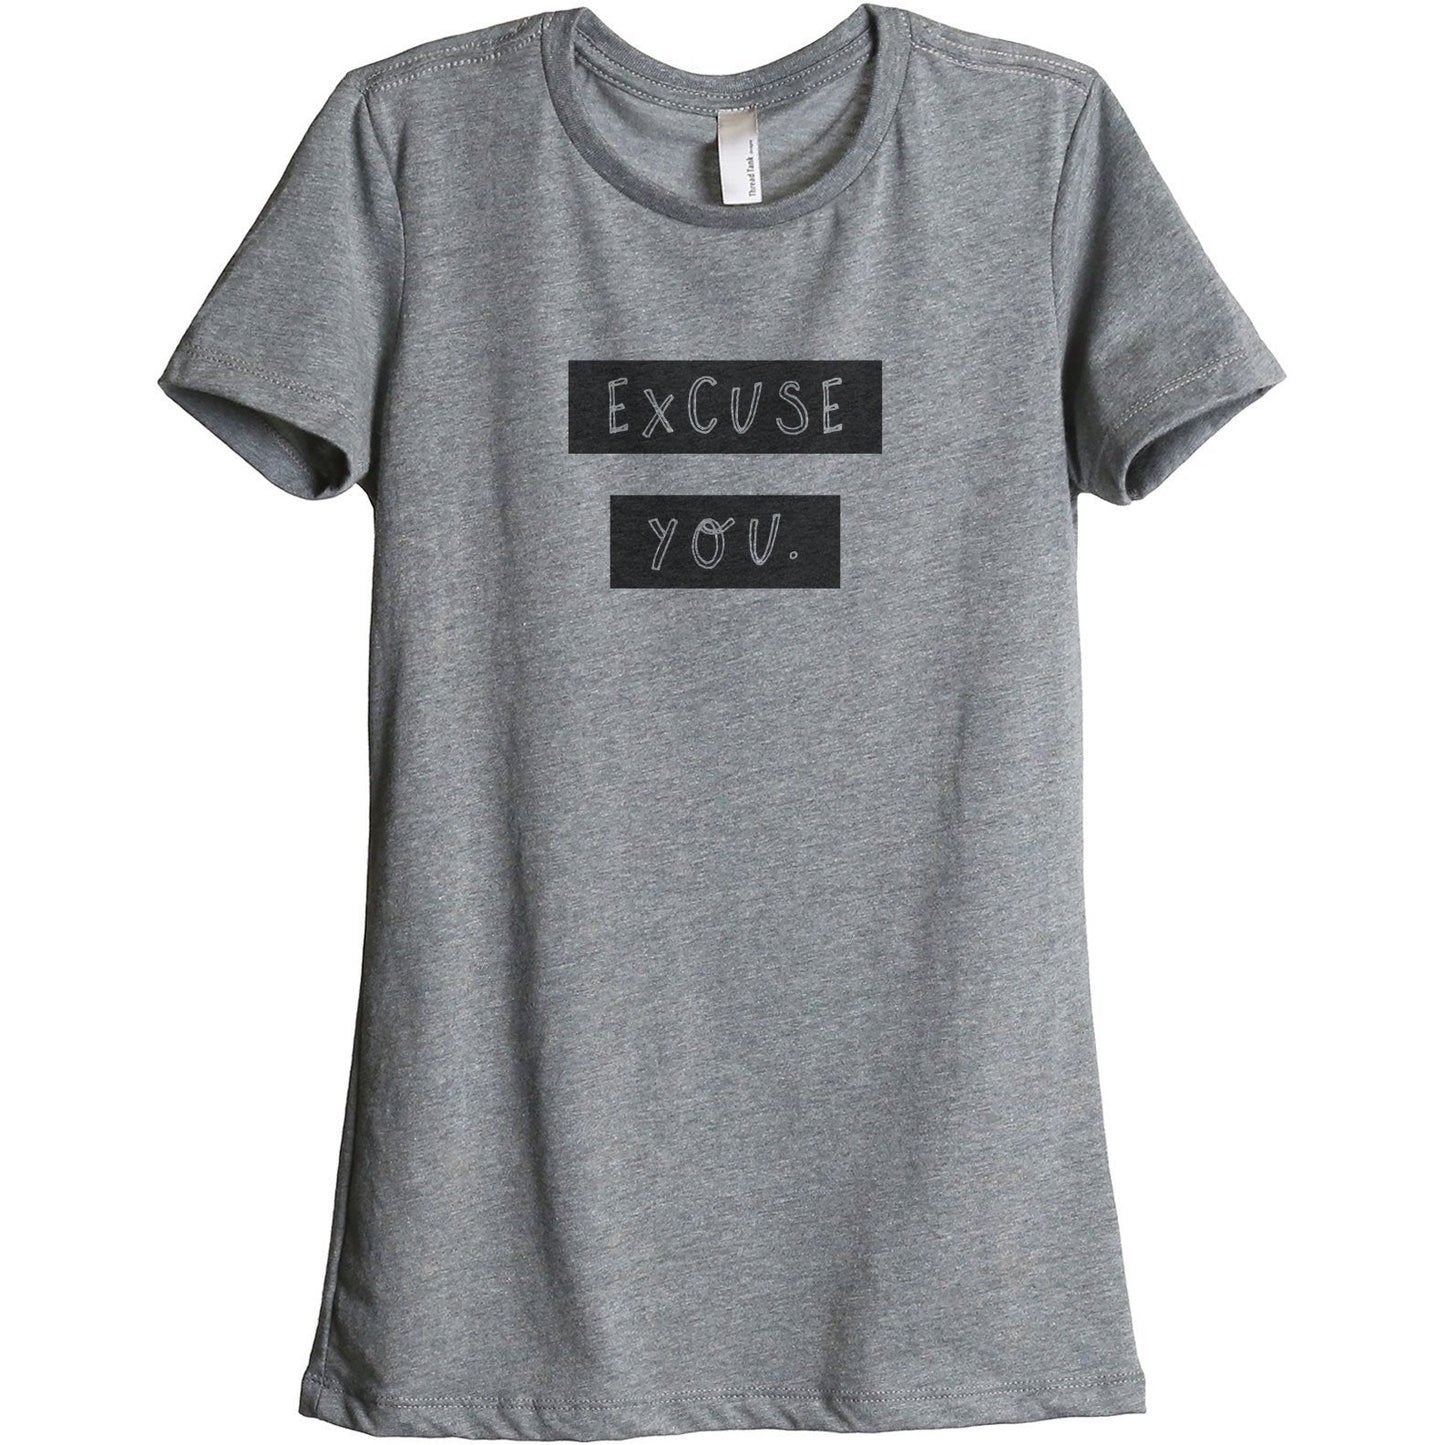 Excuse You Women's Relaxed Crewneck T-Shirt Top Tee Heather Grey